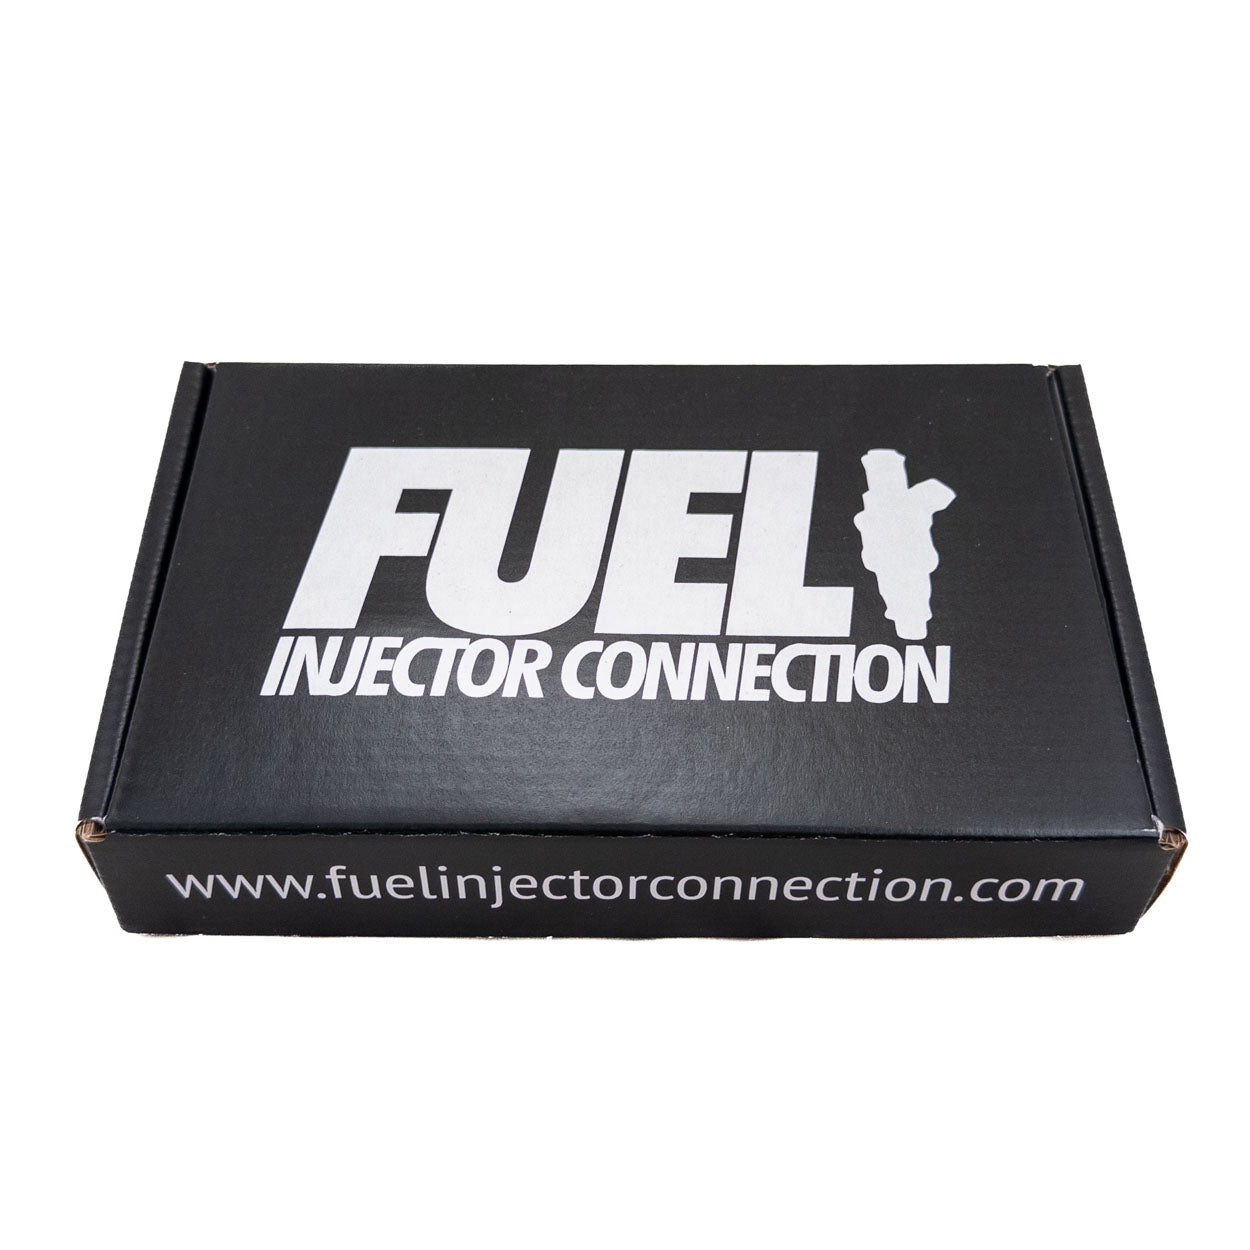 Fuel Injector Connection 1000cc (95lb) 60mm EV6 USCAR Injector (set of 8)